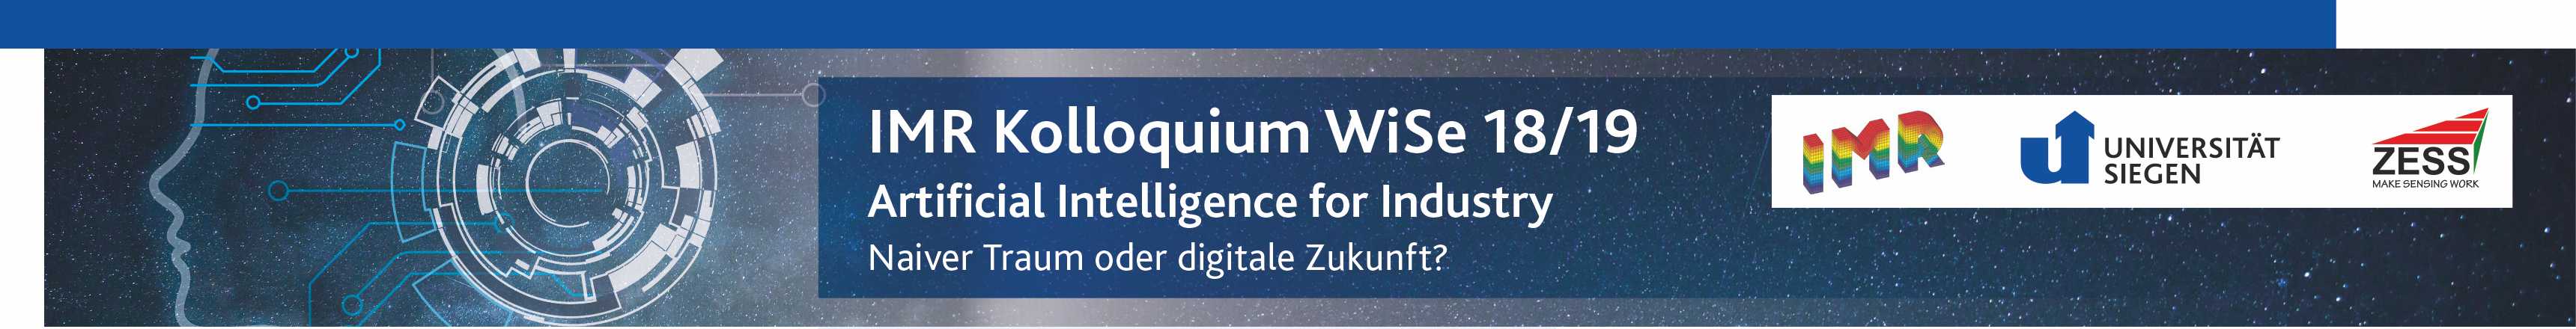 IMR Kolloquium 18/19: Artificial Intelligence for Industry - Naiver Traum oder digitale Zukunft?